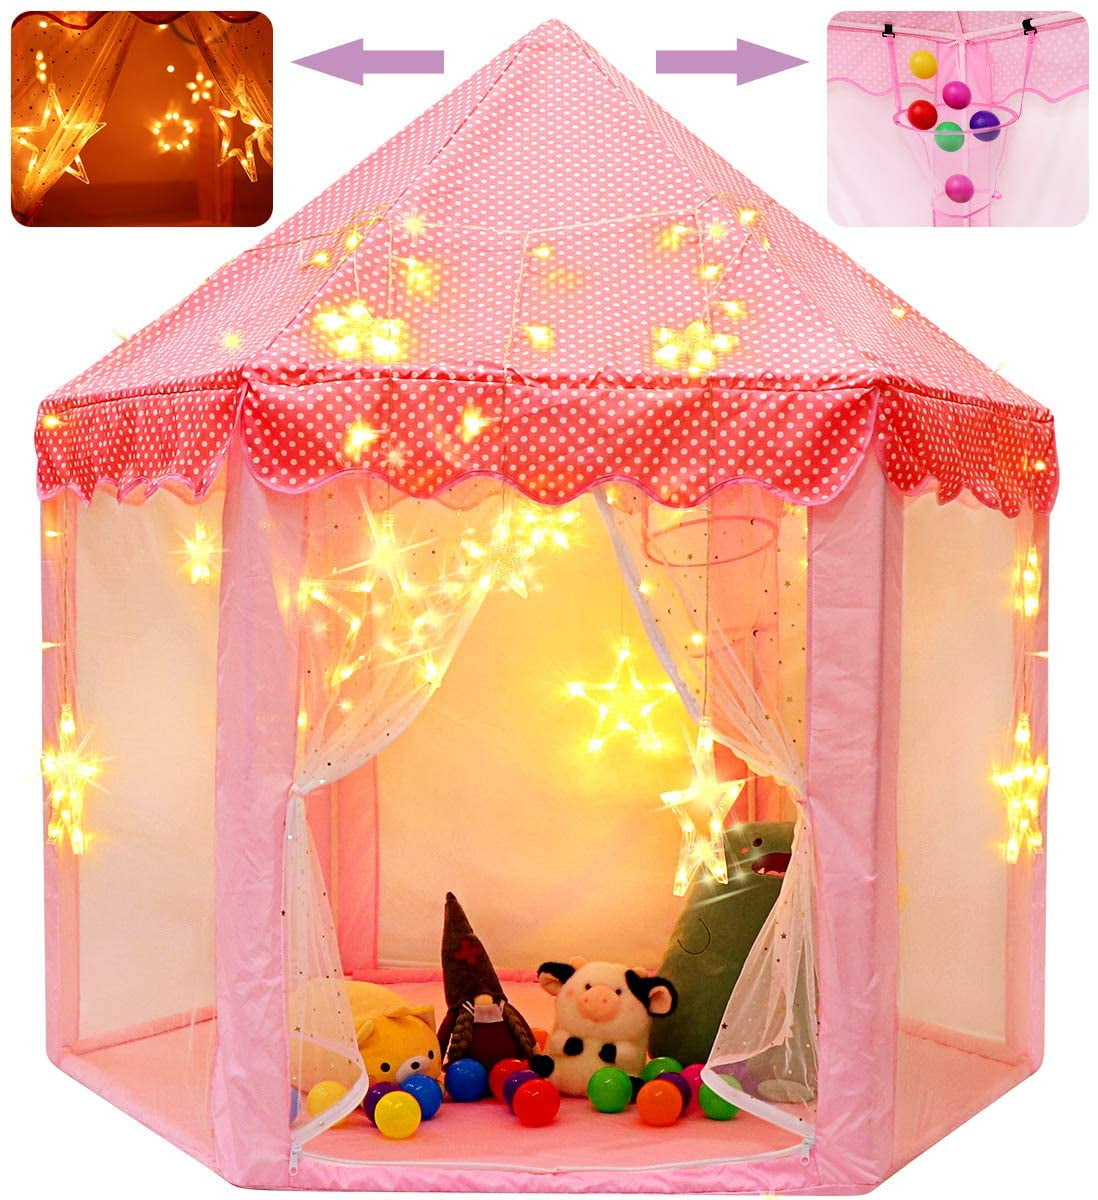 Zncmrr Princess Castle Play Tent For Little Girls With Large Star String Lights 